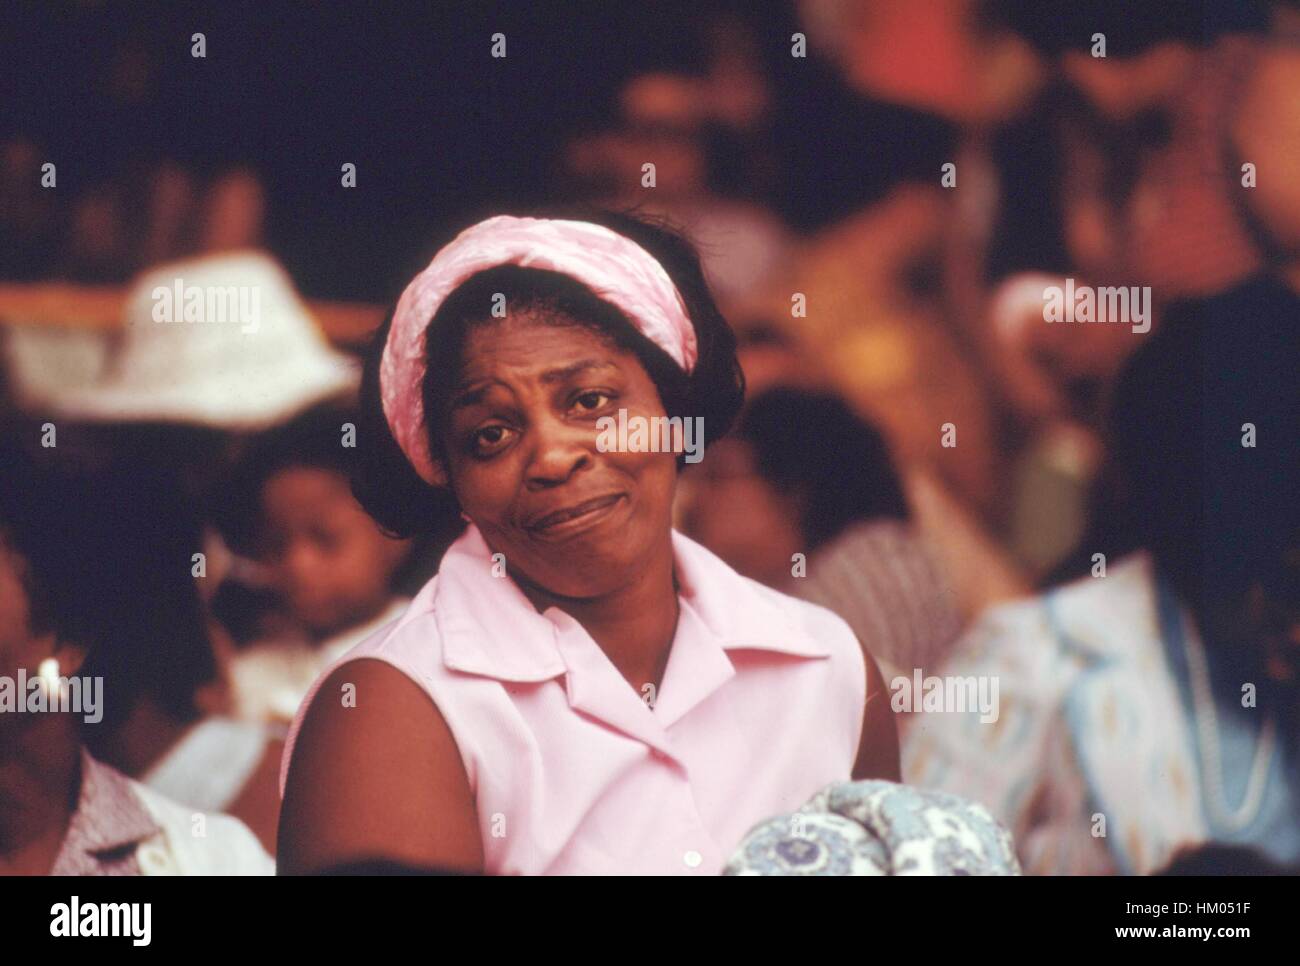 A woman with matching pink blouse and hair band raises her eyebrows and tilts her head in a large crowd outdoors in the South Side of Chicago, Illinois, 1973. Image courtesy National Archives. Stock Photo